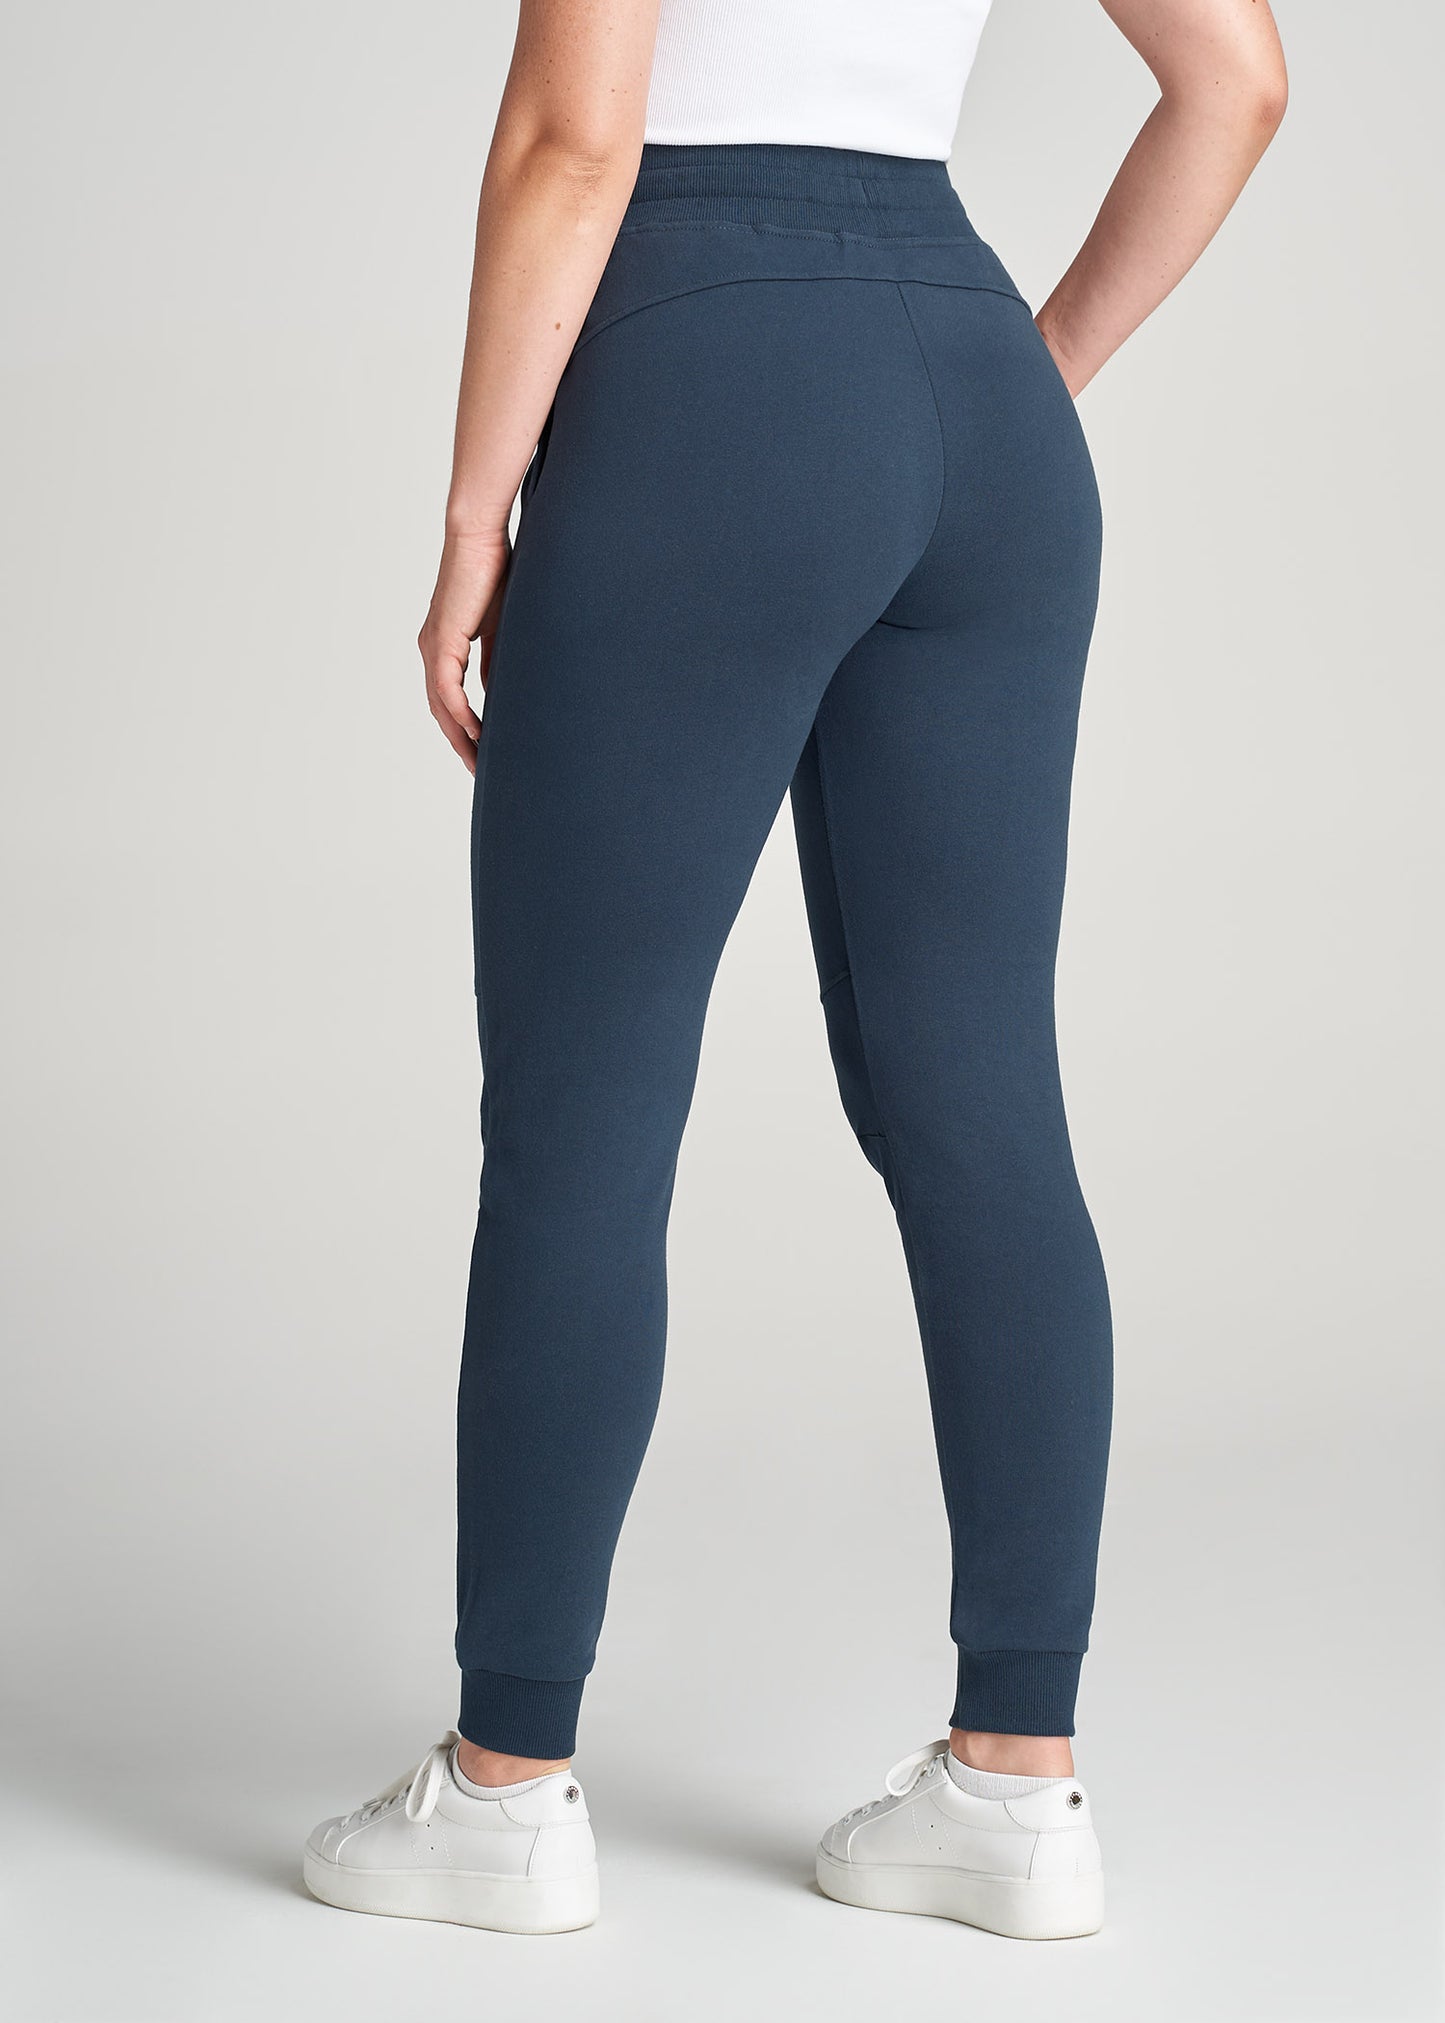 American-Tall-Women-Tall-FrenchTerry-Jogger-BrightNavy-back